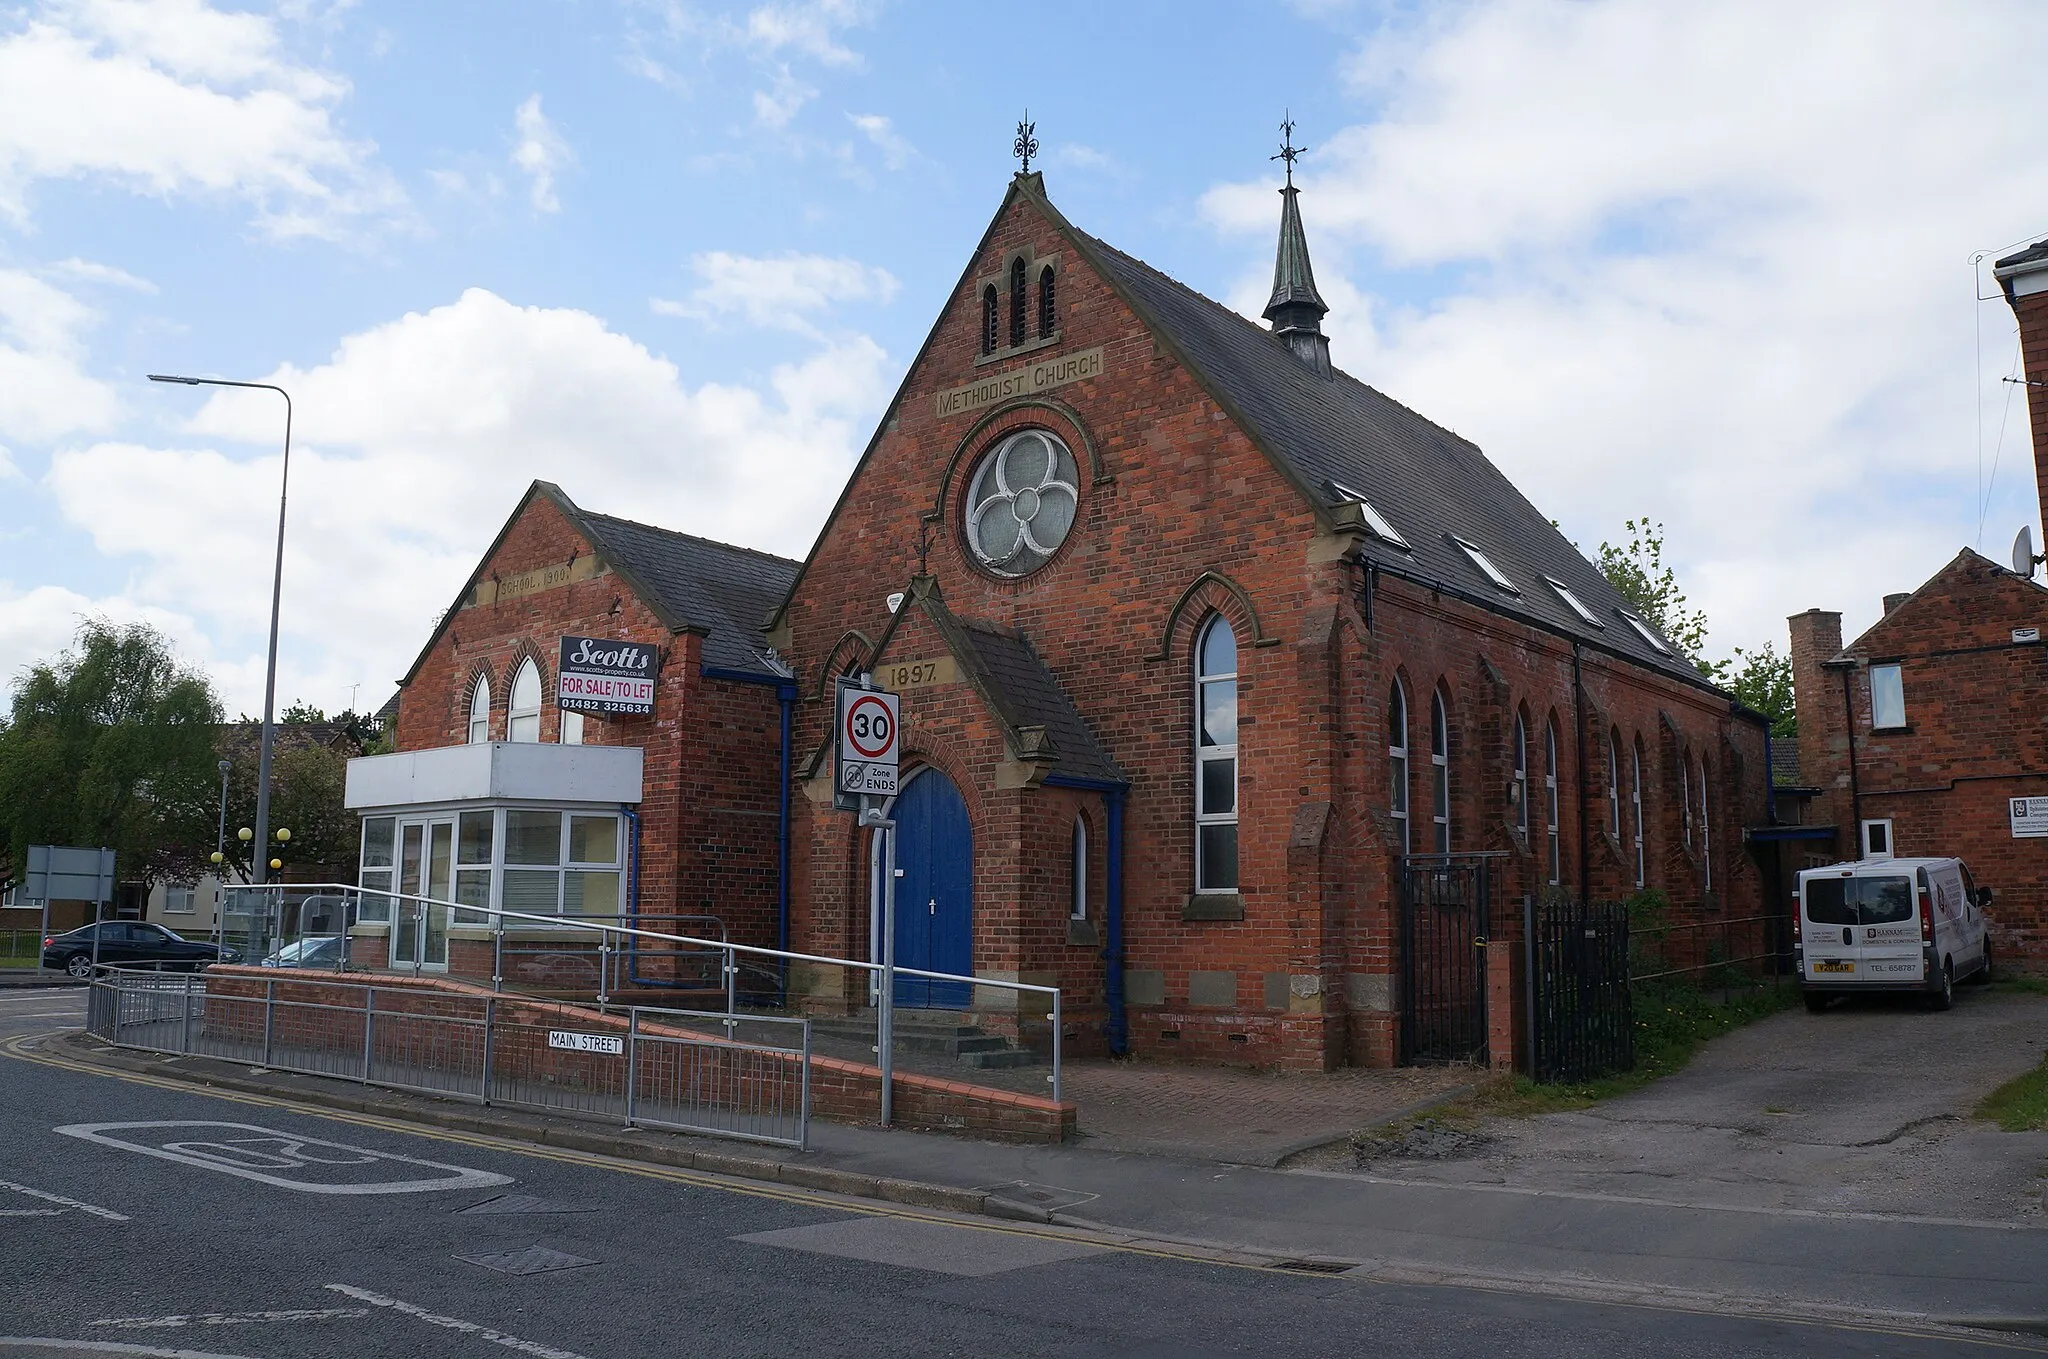 Photo showing: Former Methodist Church, Willerby Square, Willerby, East Riding of Yorkshire, England. Built in 1897.